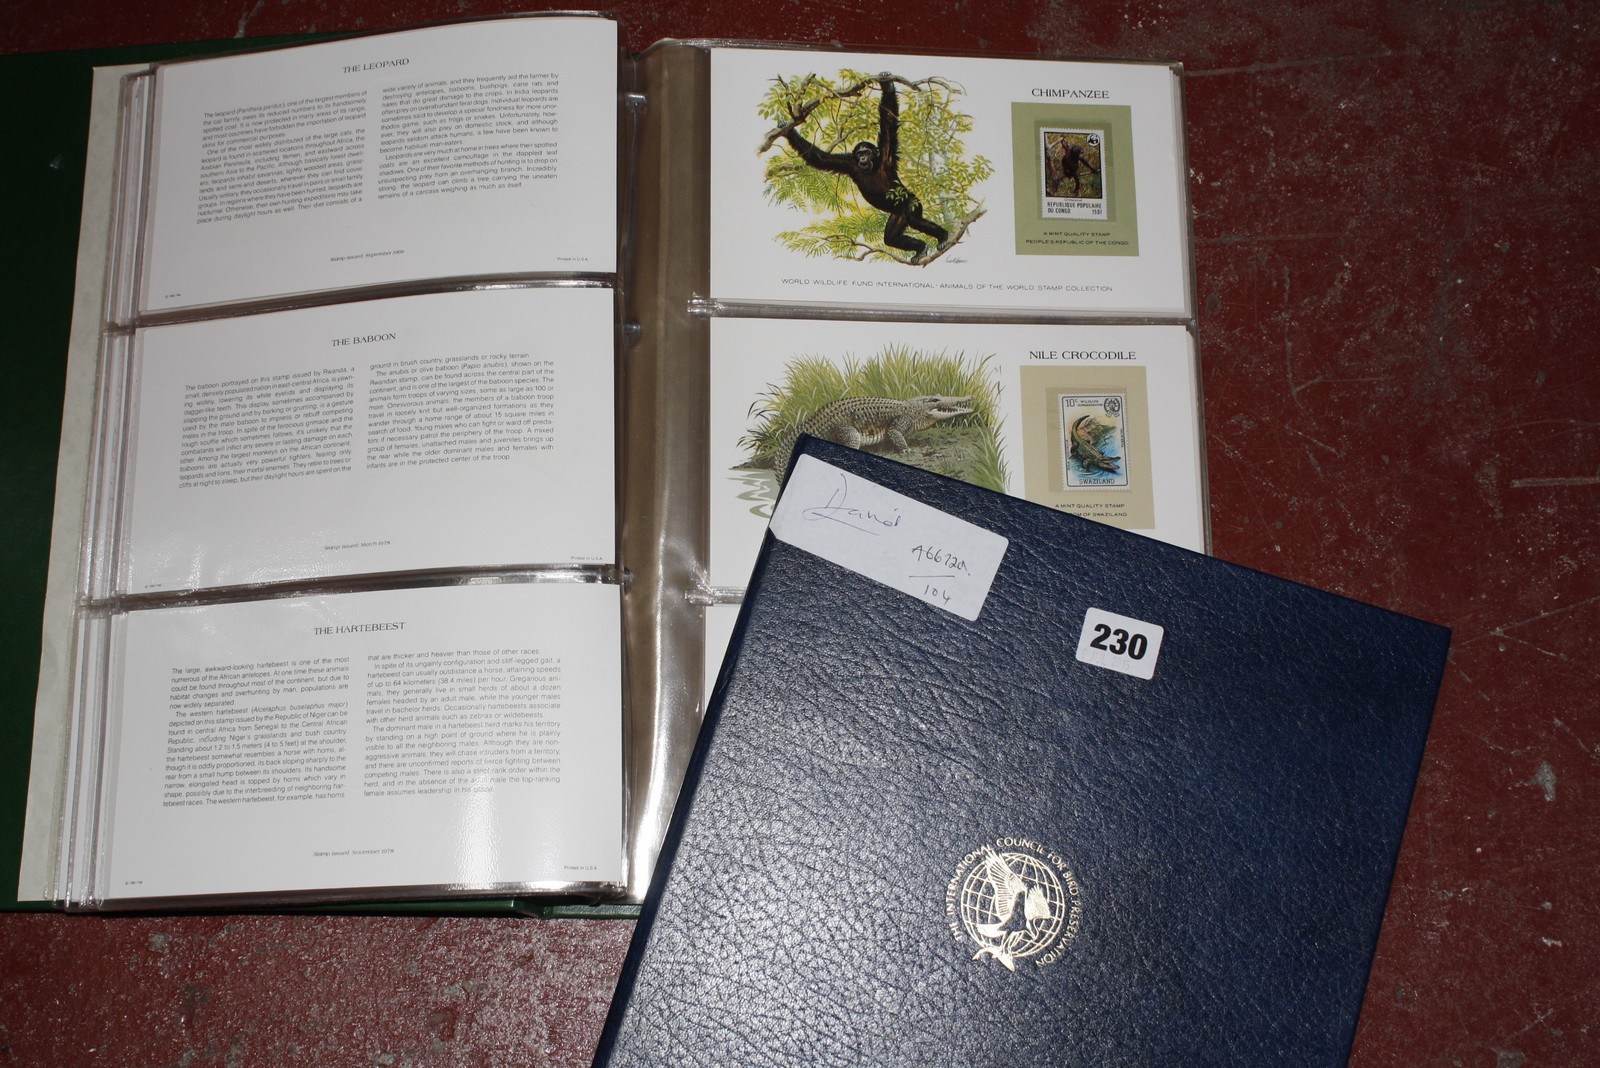 Three stamp albums : The Birds of the world certified February 1st 1979, and two WWF Animals of